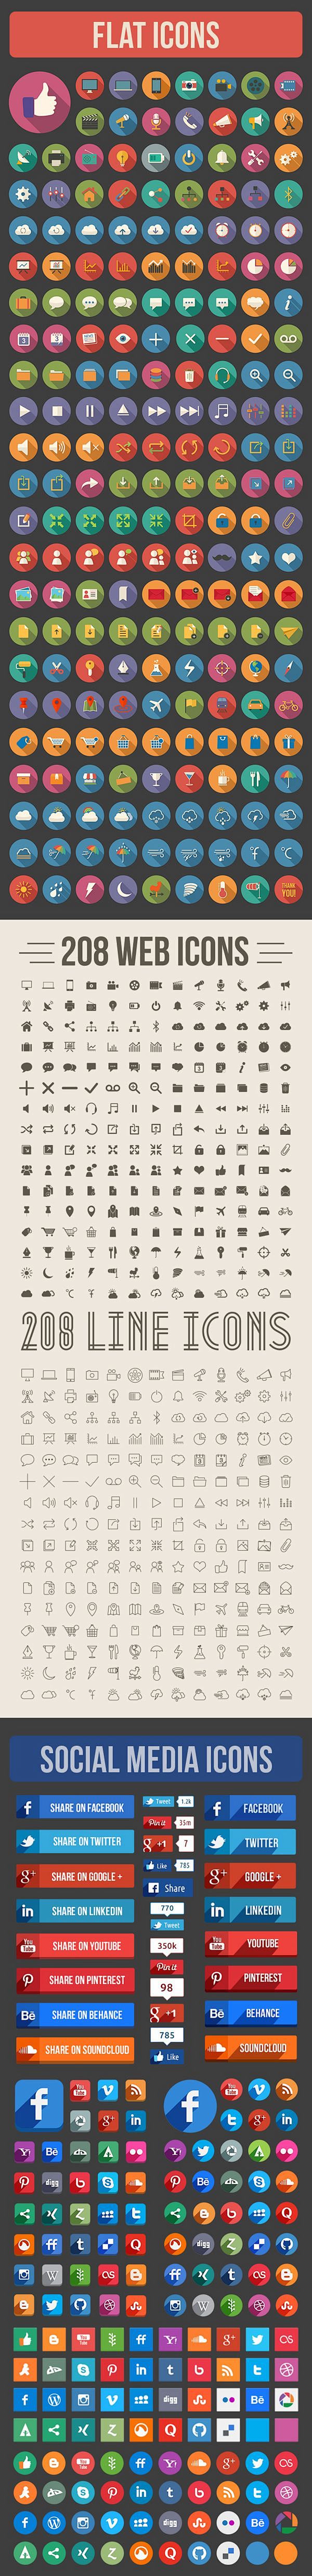 3066Icons pack by Ha...